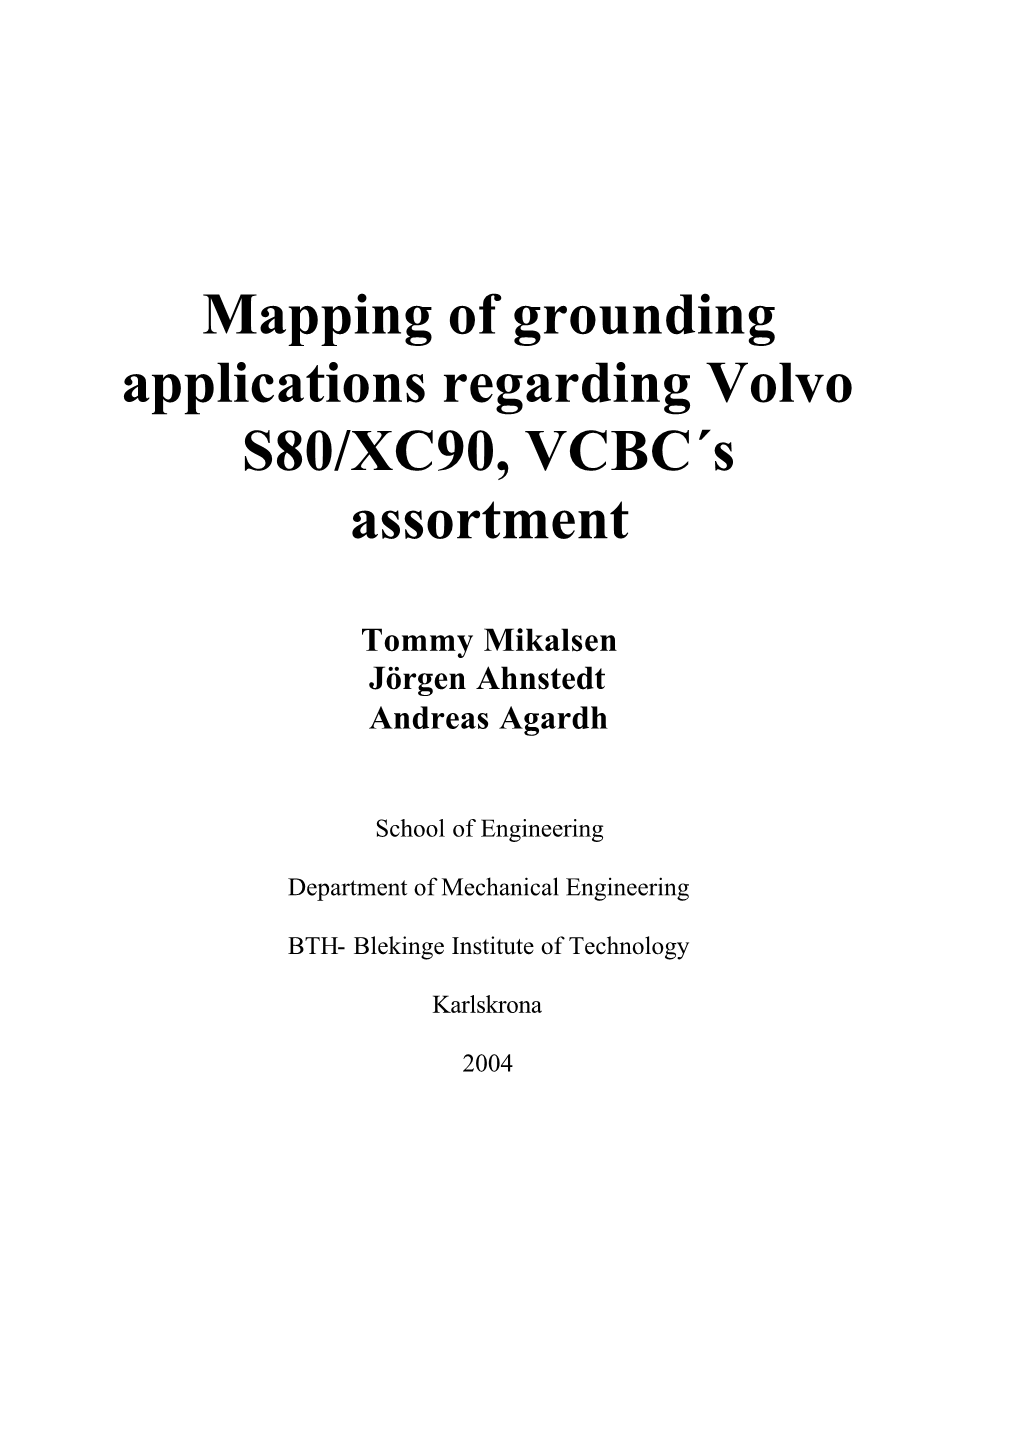 Mapping of Grounding Applications Regarding Volvo S80/XC90, VCBC´S Assortment